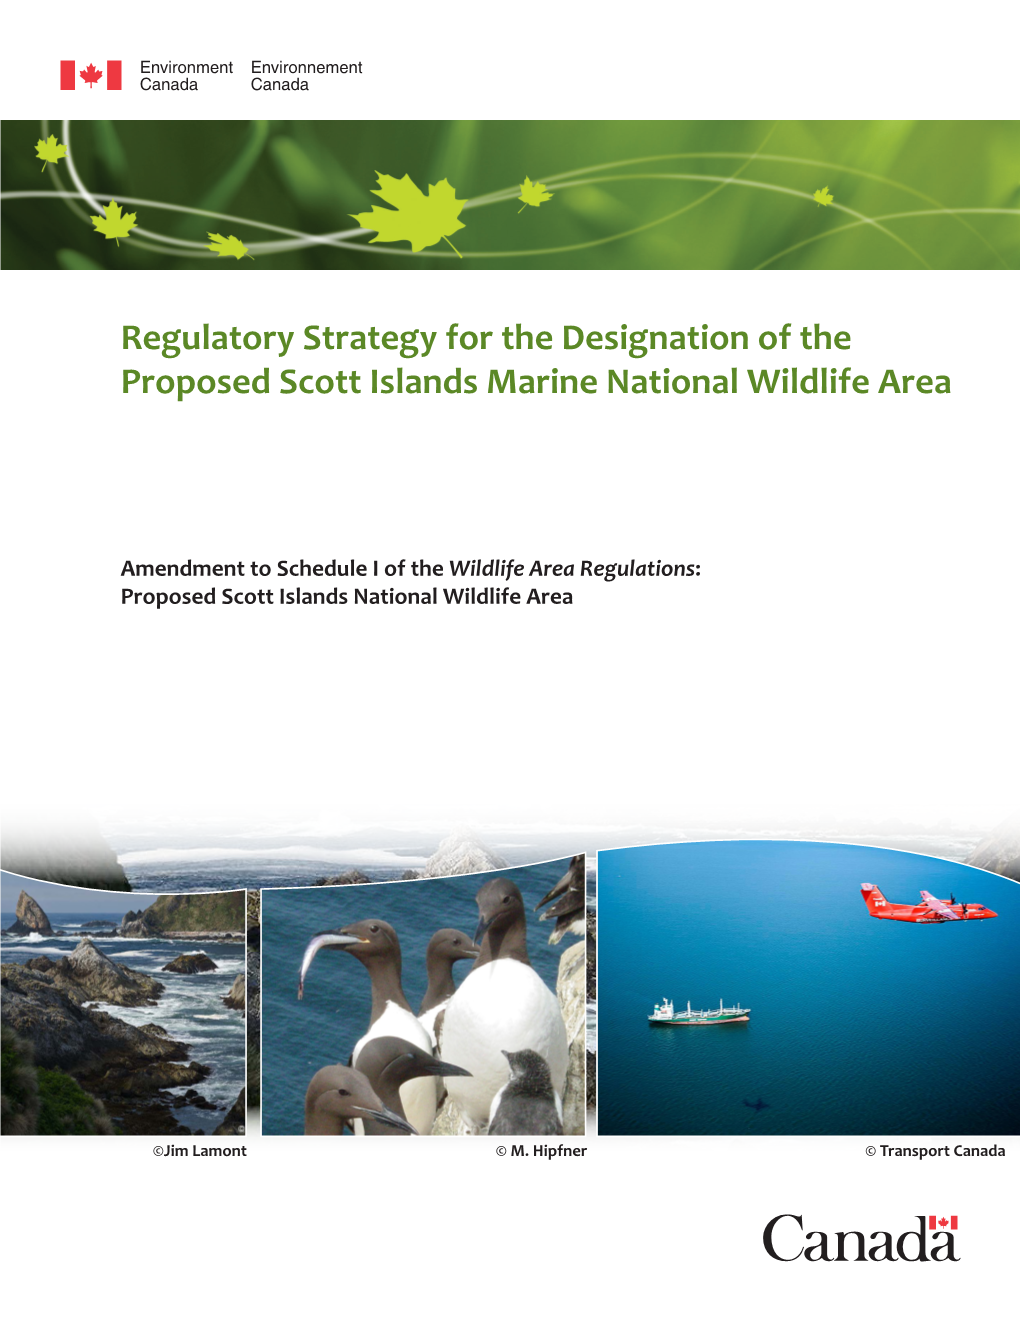 Regulatory Strategy for the Designation of the Proposed Scott Islands Marine National Wildlife Area